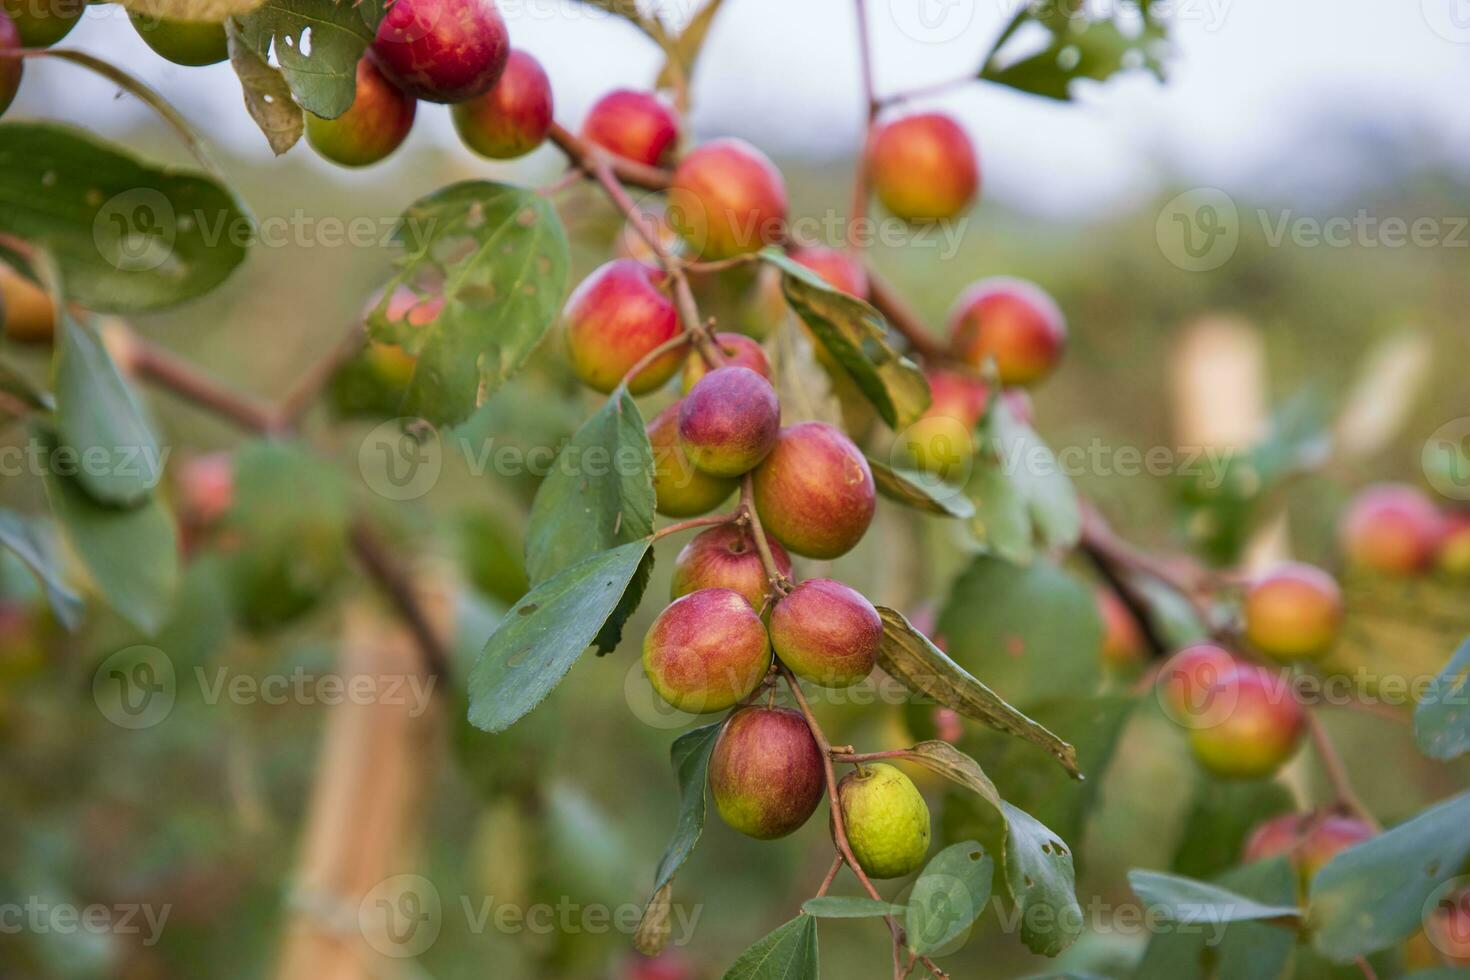 Fruit tree with unripe Red jujube fruits or apple kul boroi  in the autumn garden photo